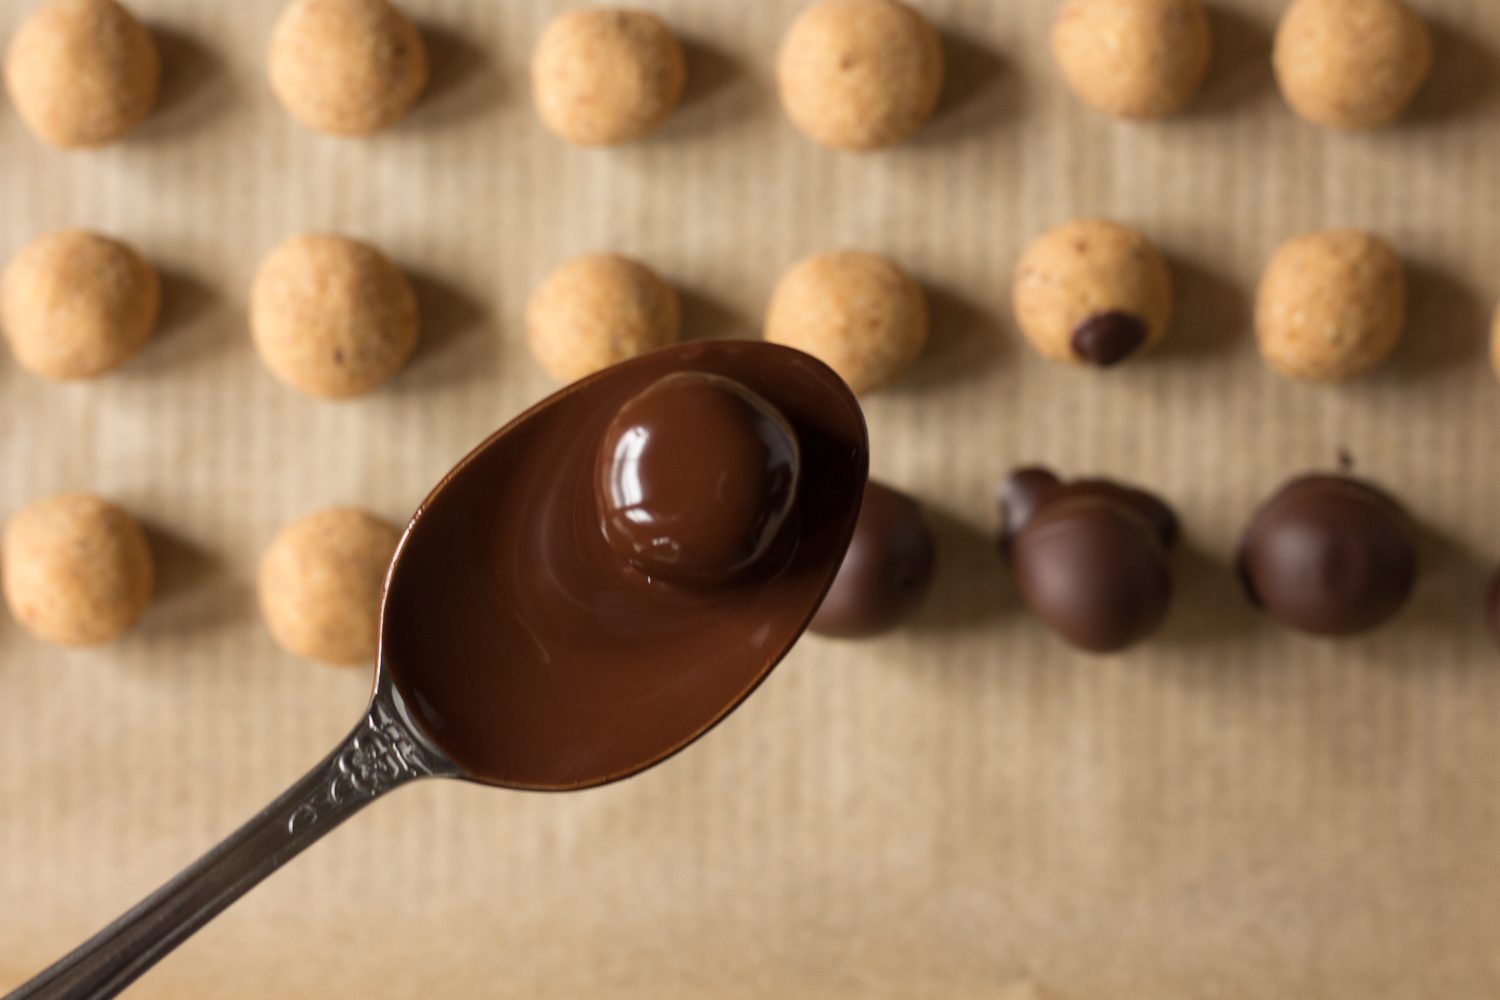 Vegan Peanut Butter balls dipped in melted dark chocolate by Flora & Vino